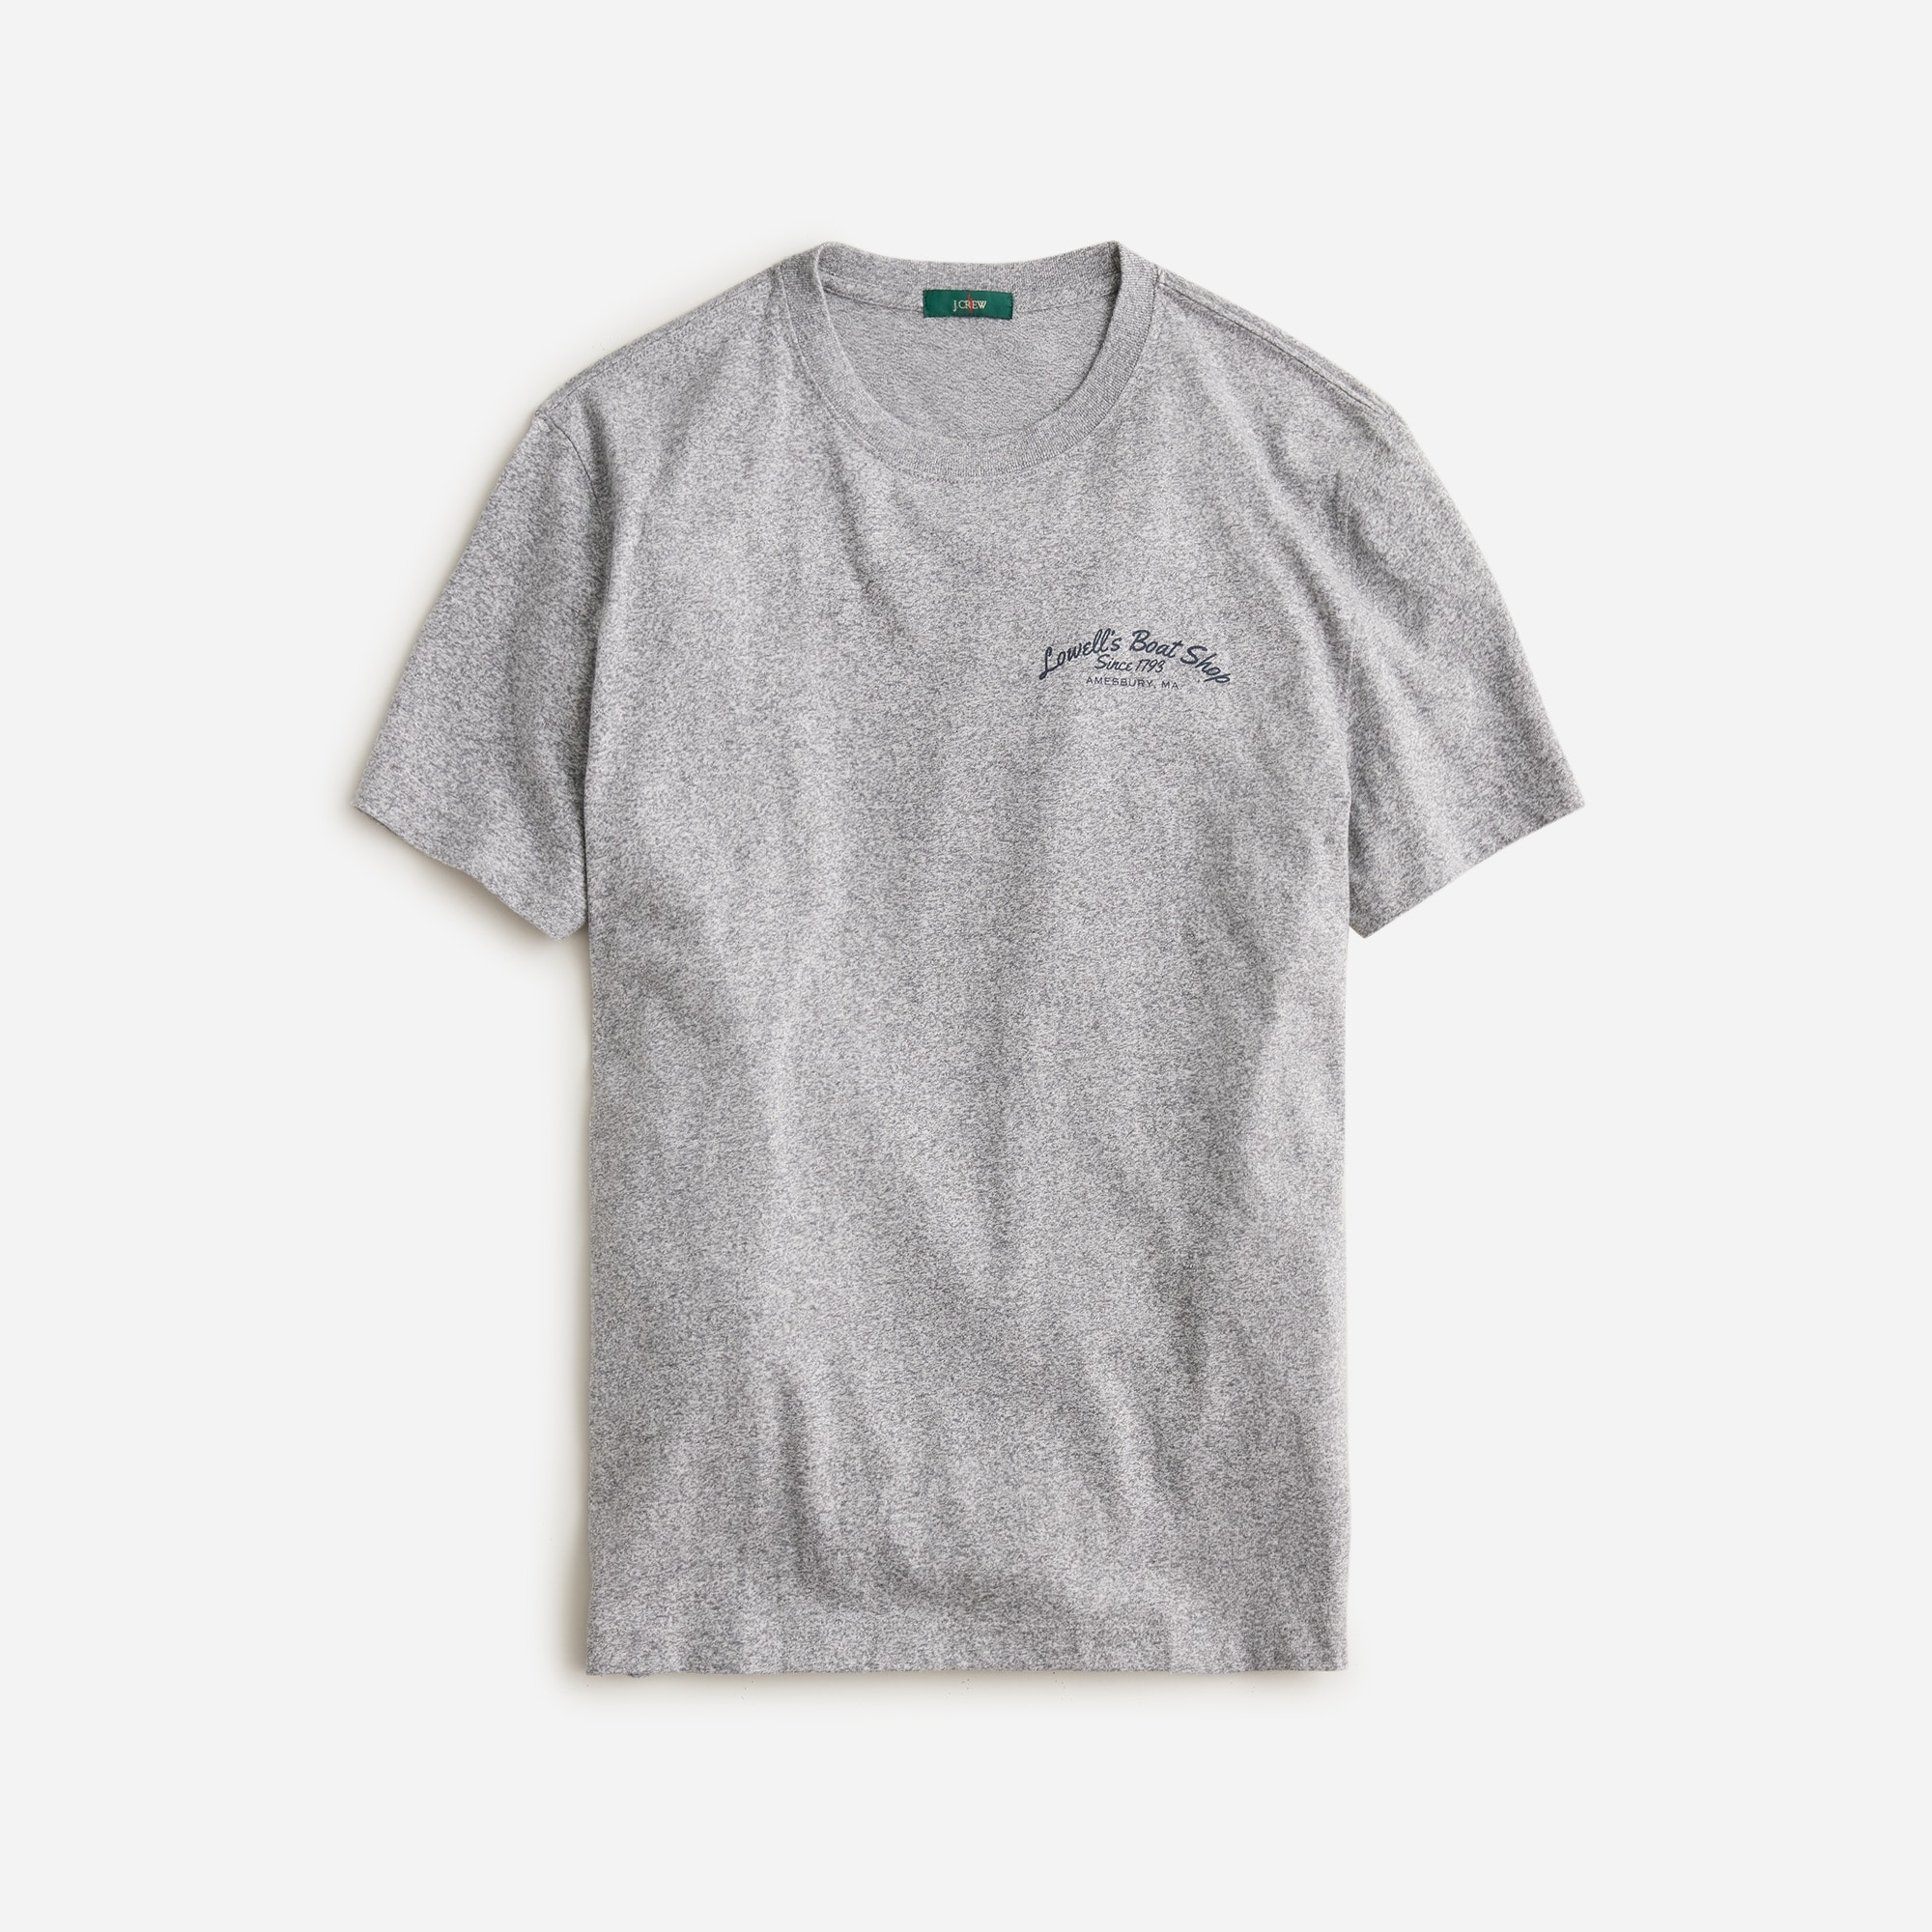 mens Lowell's Boat Shop X Wallace &amp; Barnes graphic T-shirt